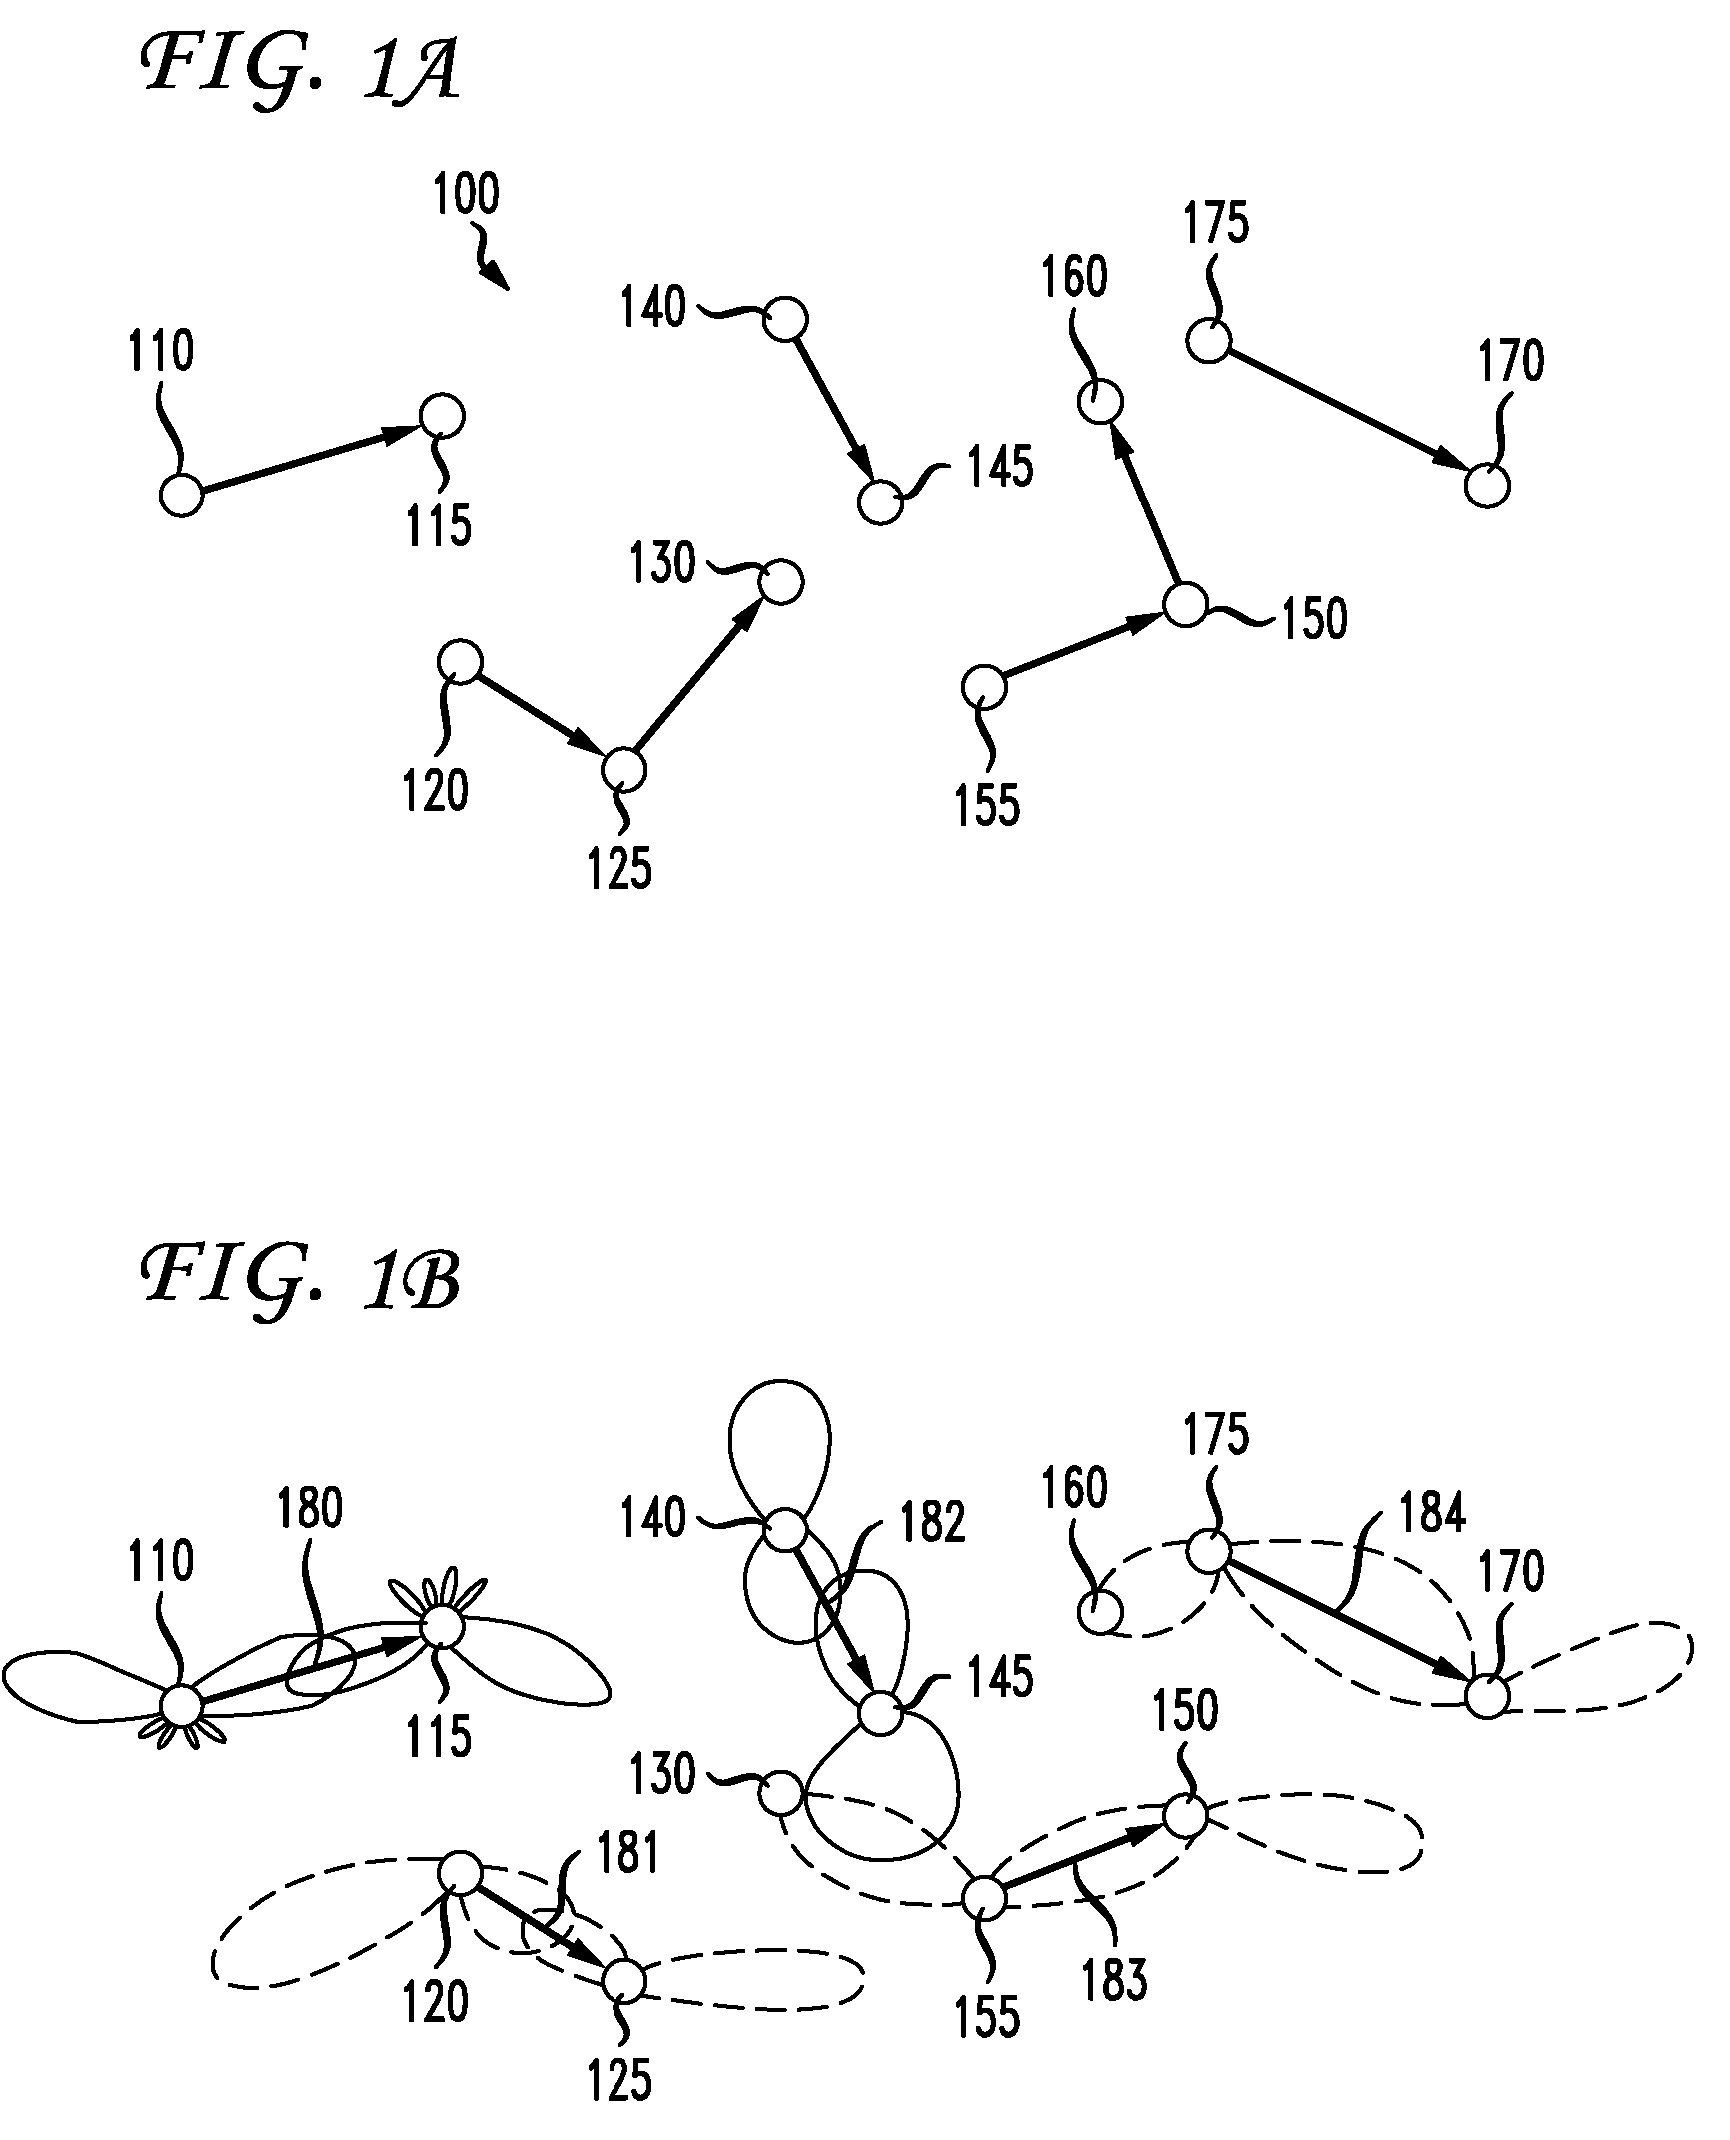 Method and Apparatus for Cross Layer Resource Allocation for Wireless Backhaul Networks